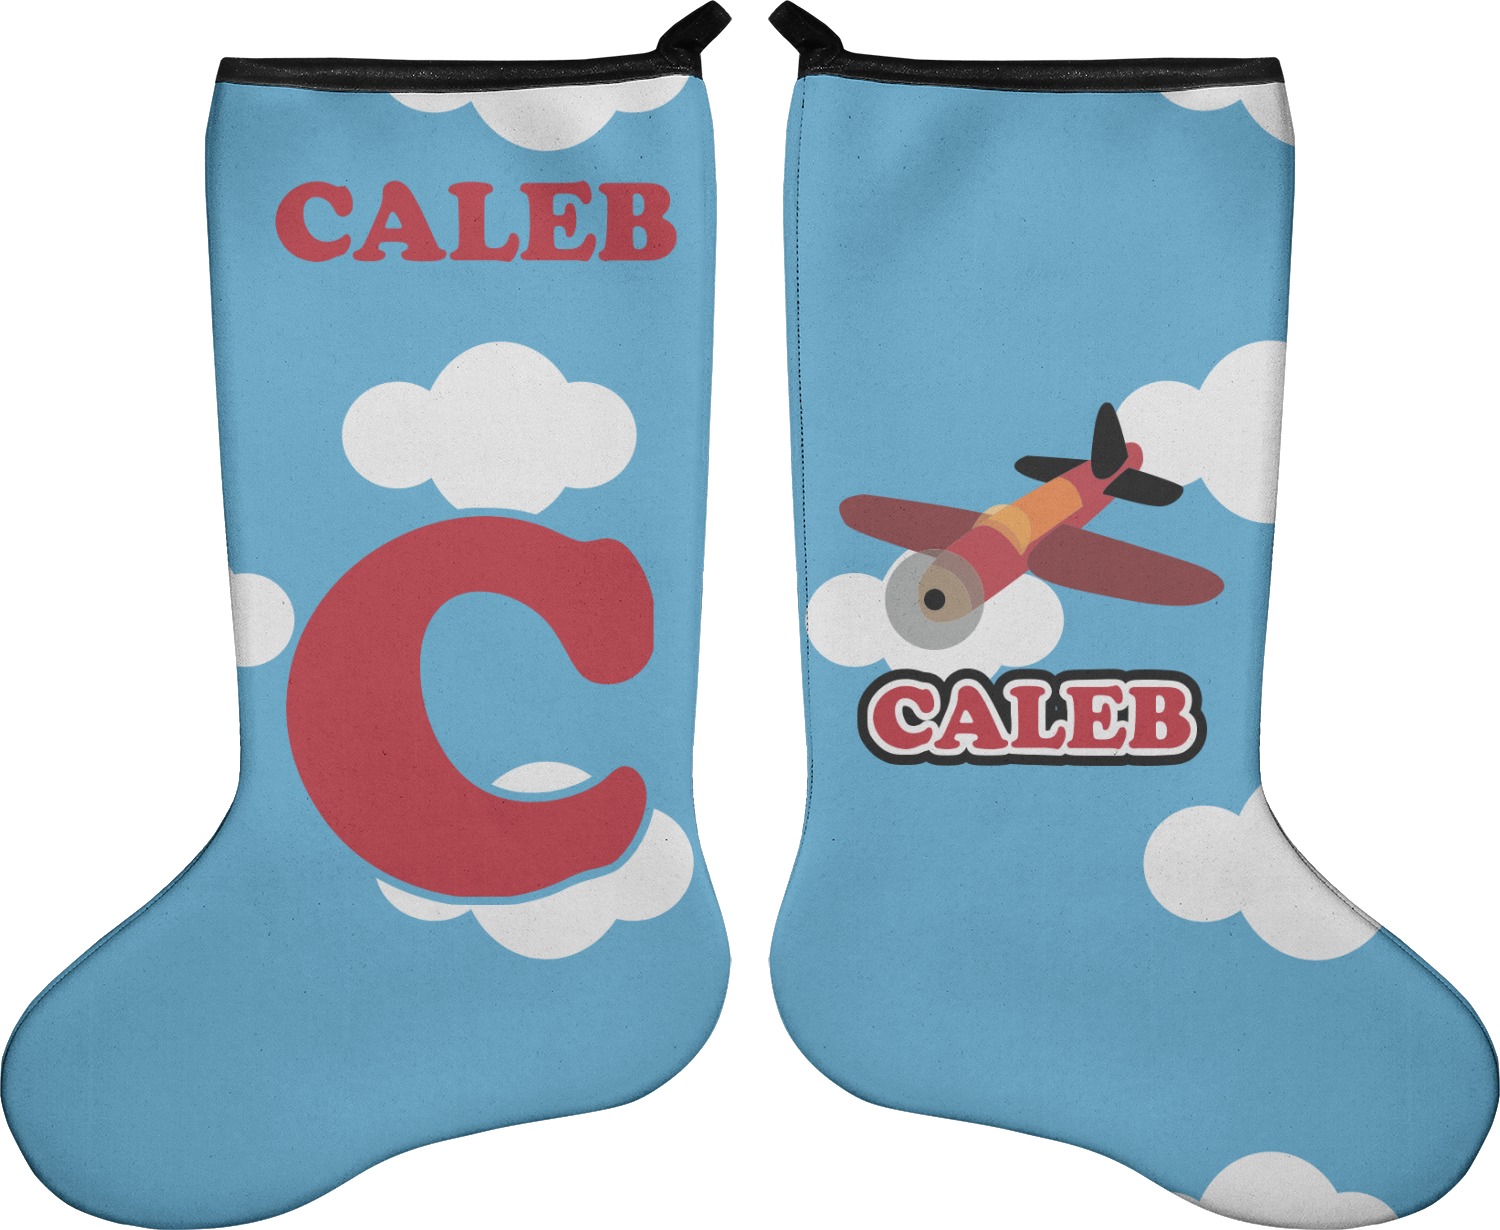 https://www.youcustomizeit.com/common/MAKE/44299/Airplane-Stocking-Double-Sided-Approval.jpg?lm=1555075647